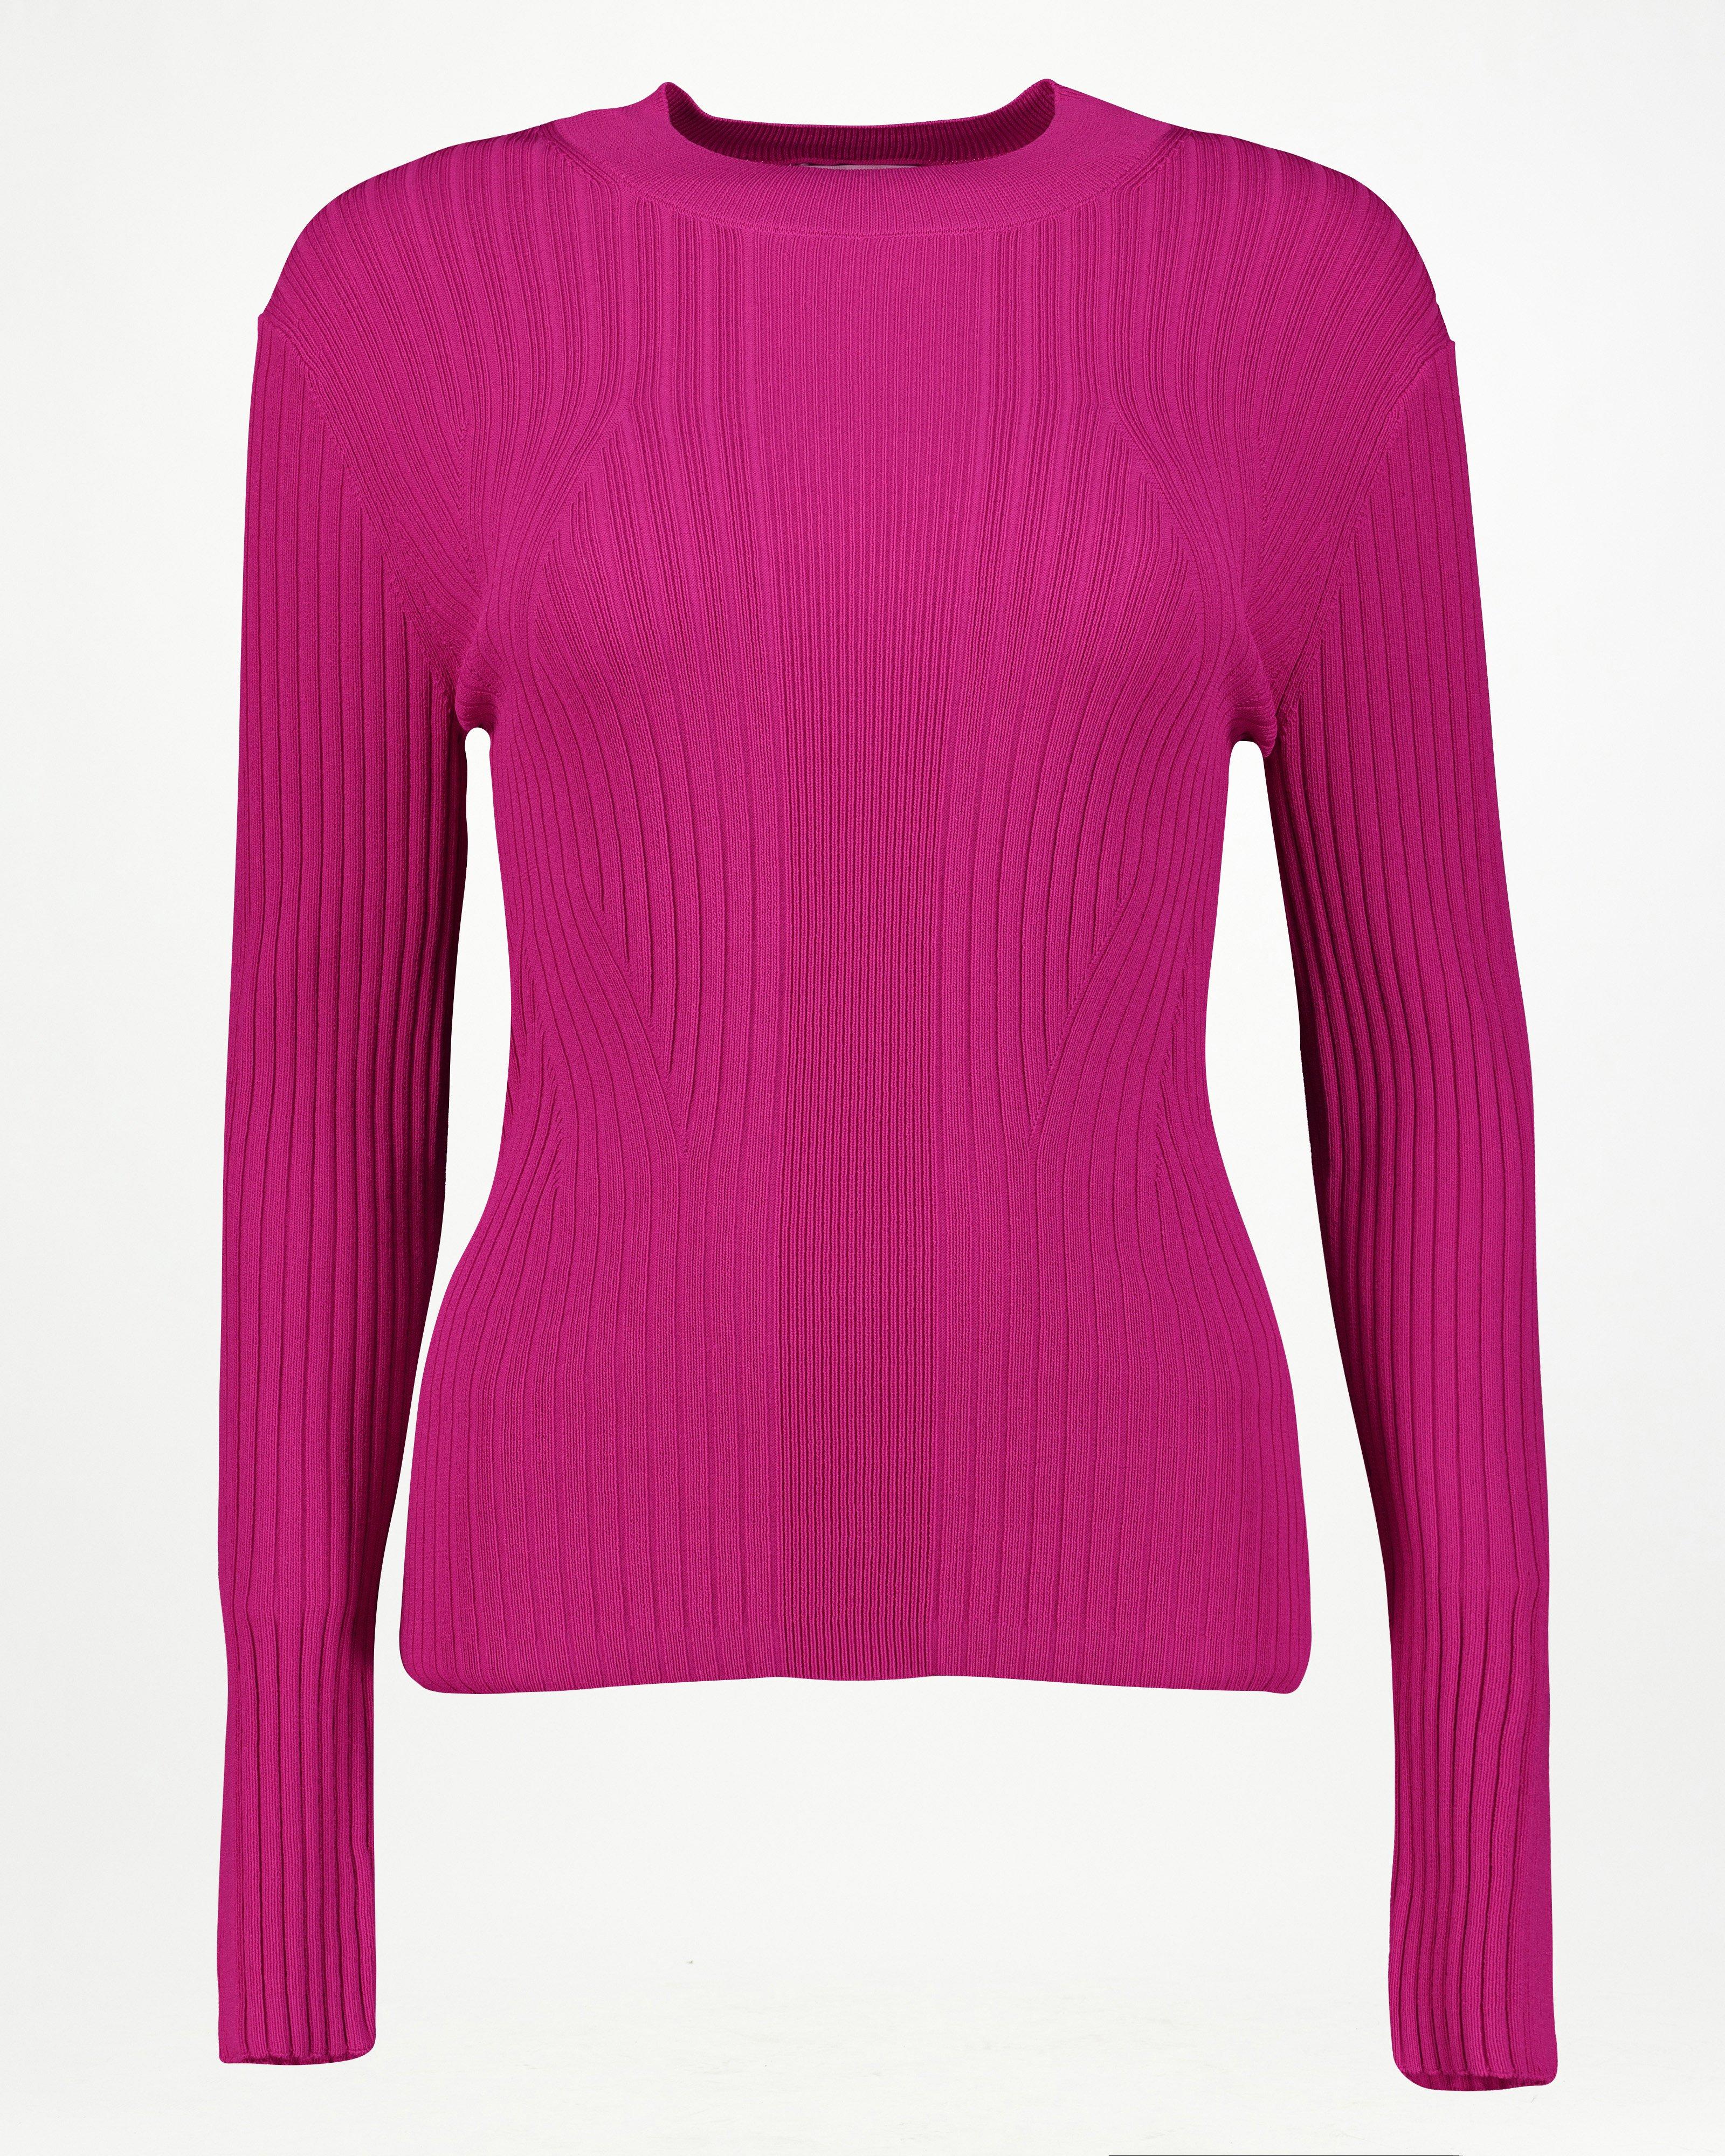  Ange Knitted Top -  Pink